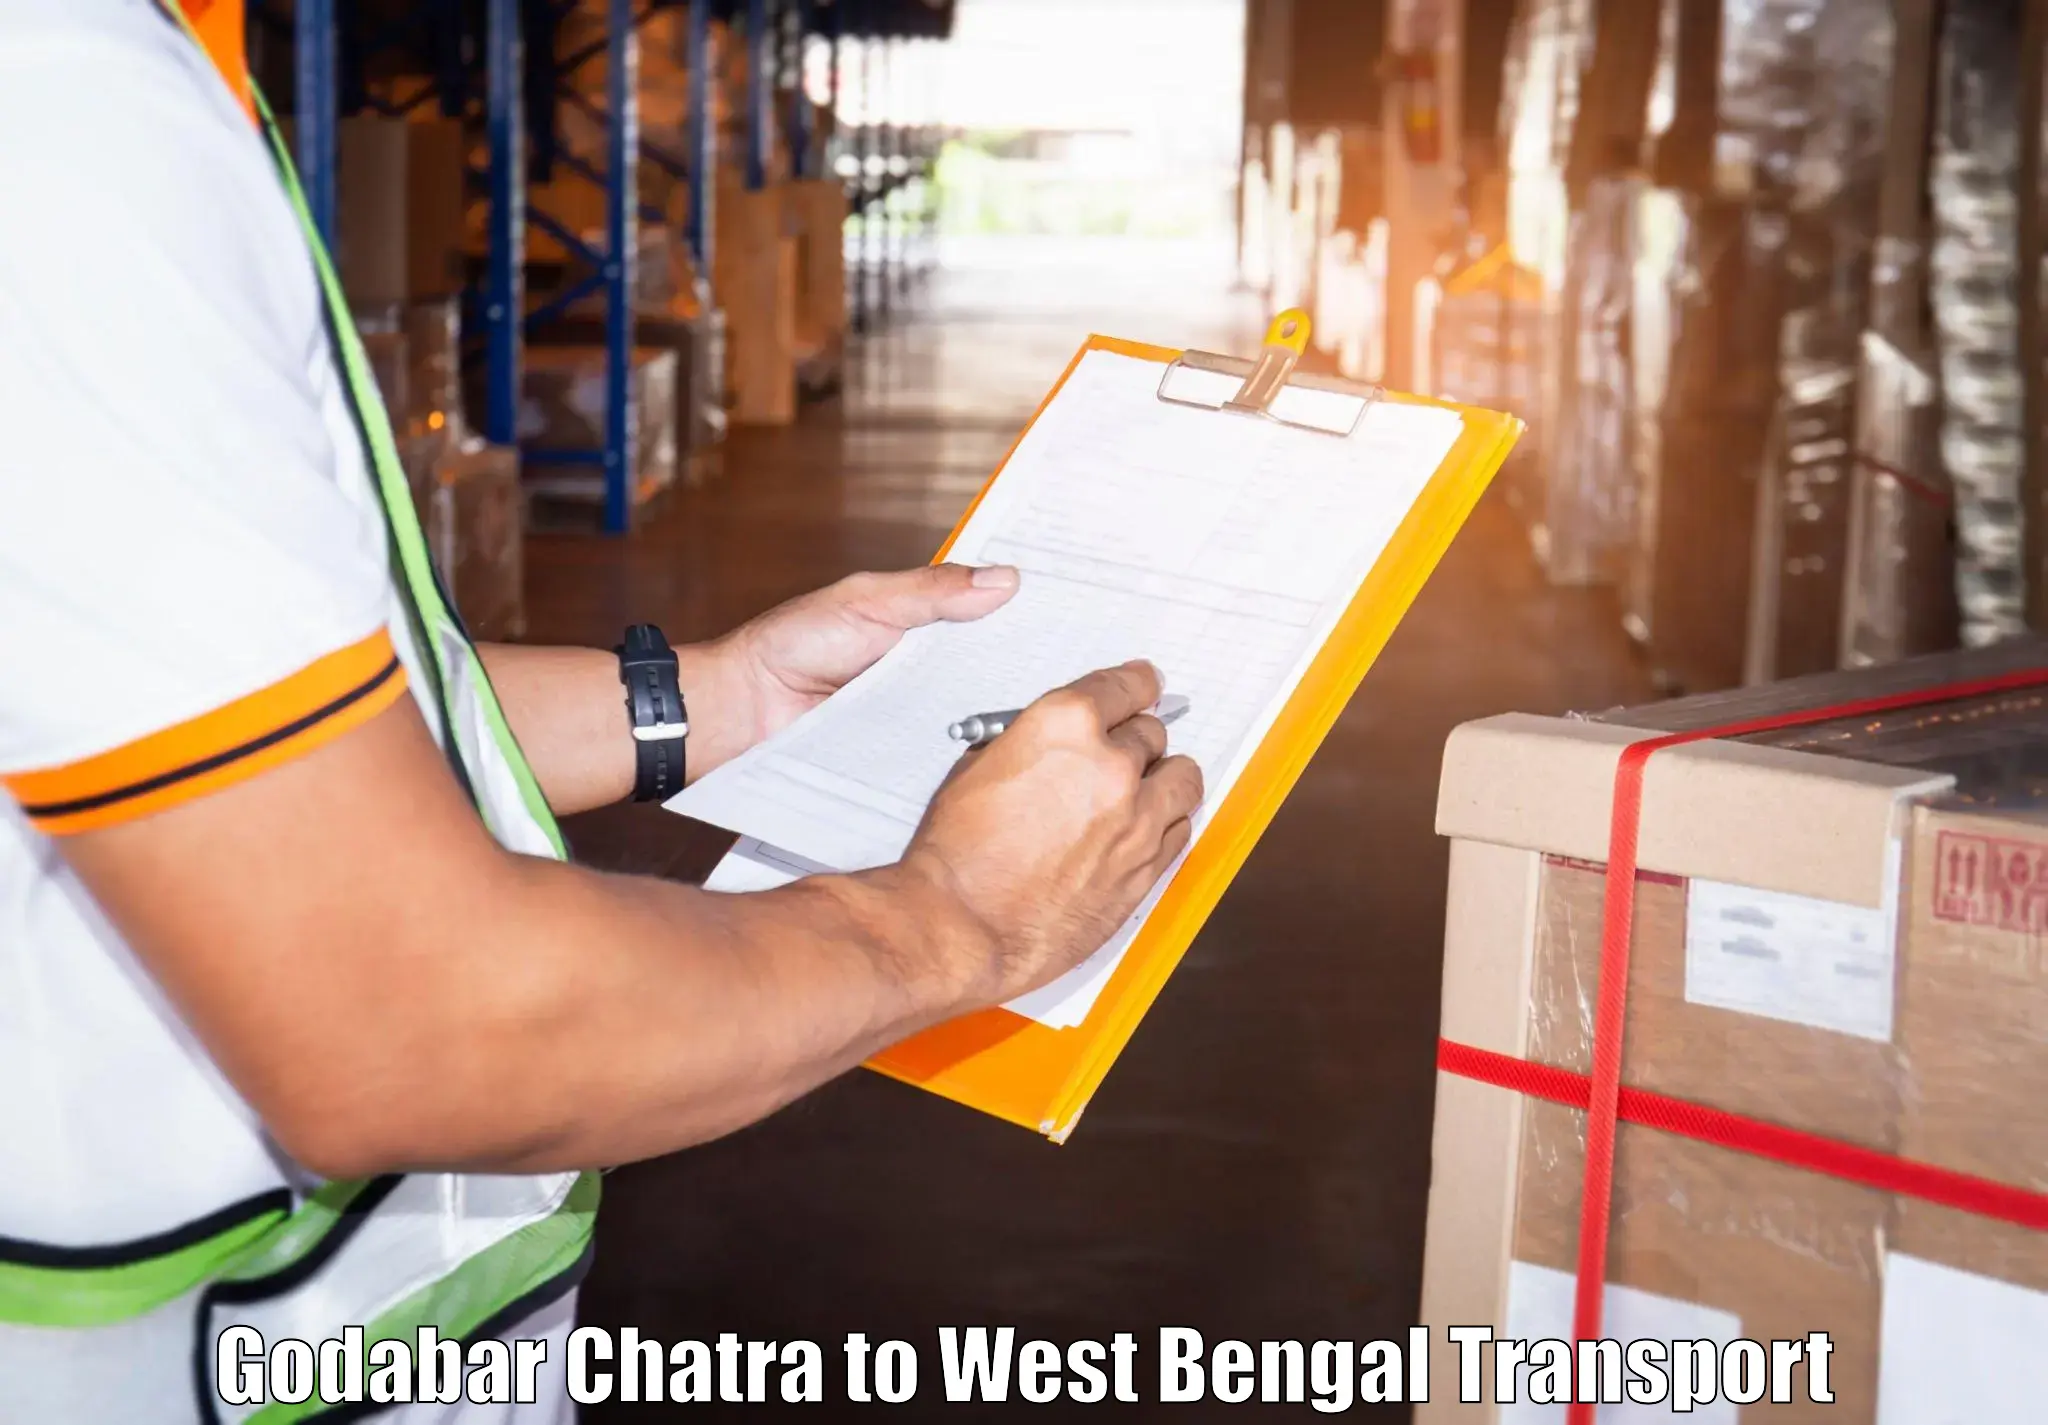 Commercial transport service Godabar Chatra to Uluberia